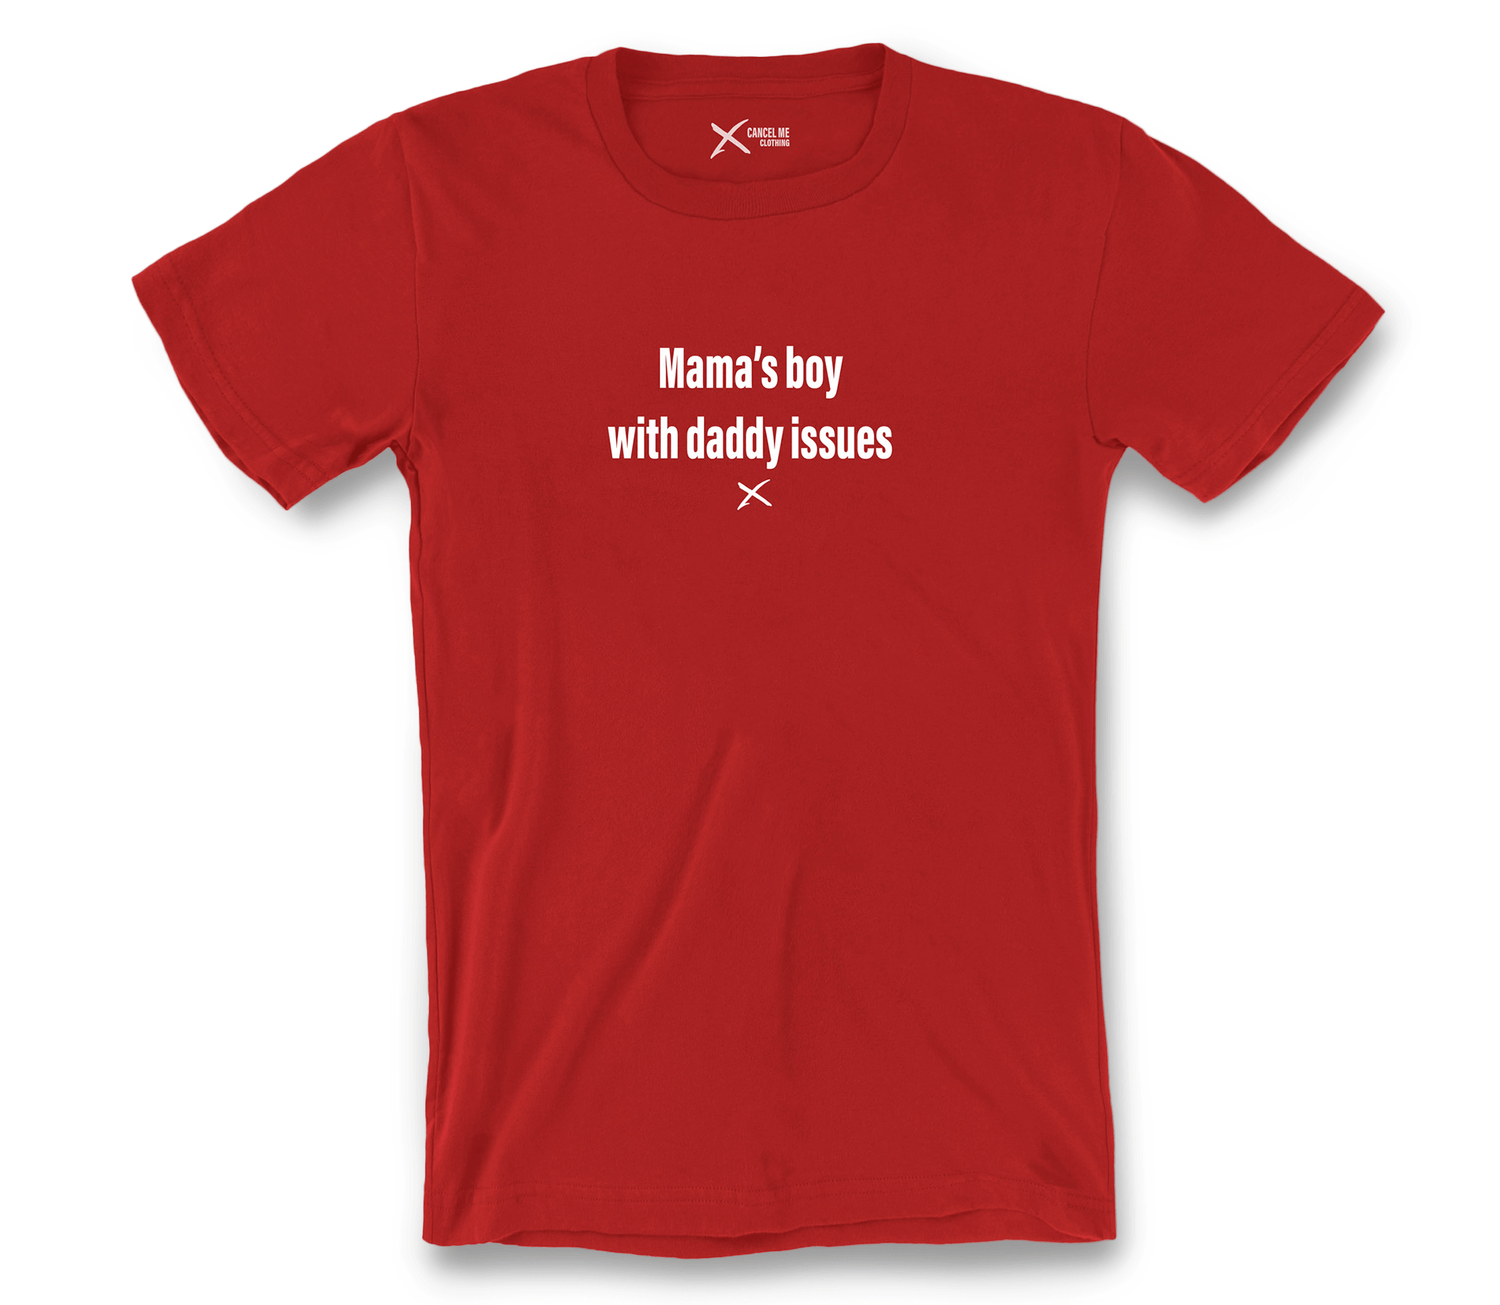 lp-mental_health_3-shirt_7791811133610_mamas-boy-with-daddy-issues-shirt_Red.png